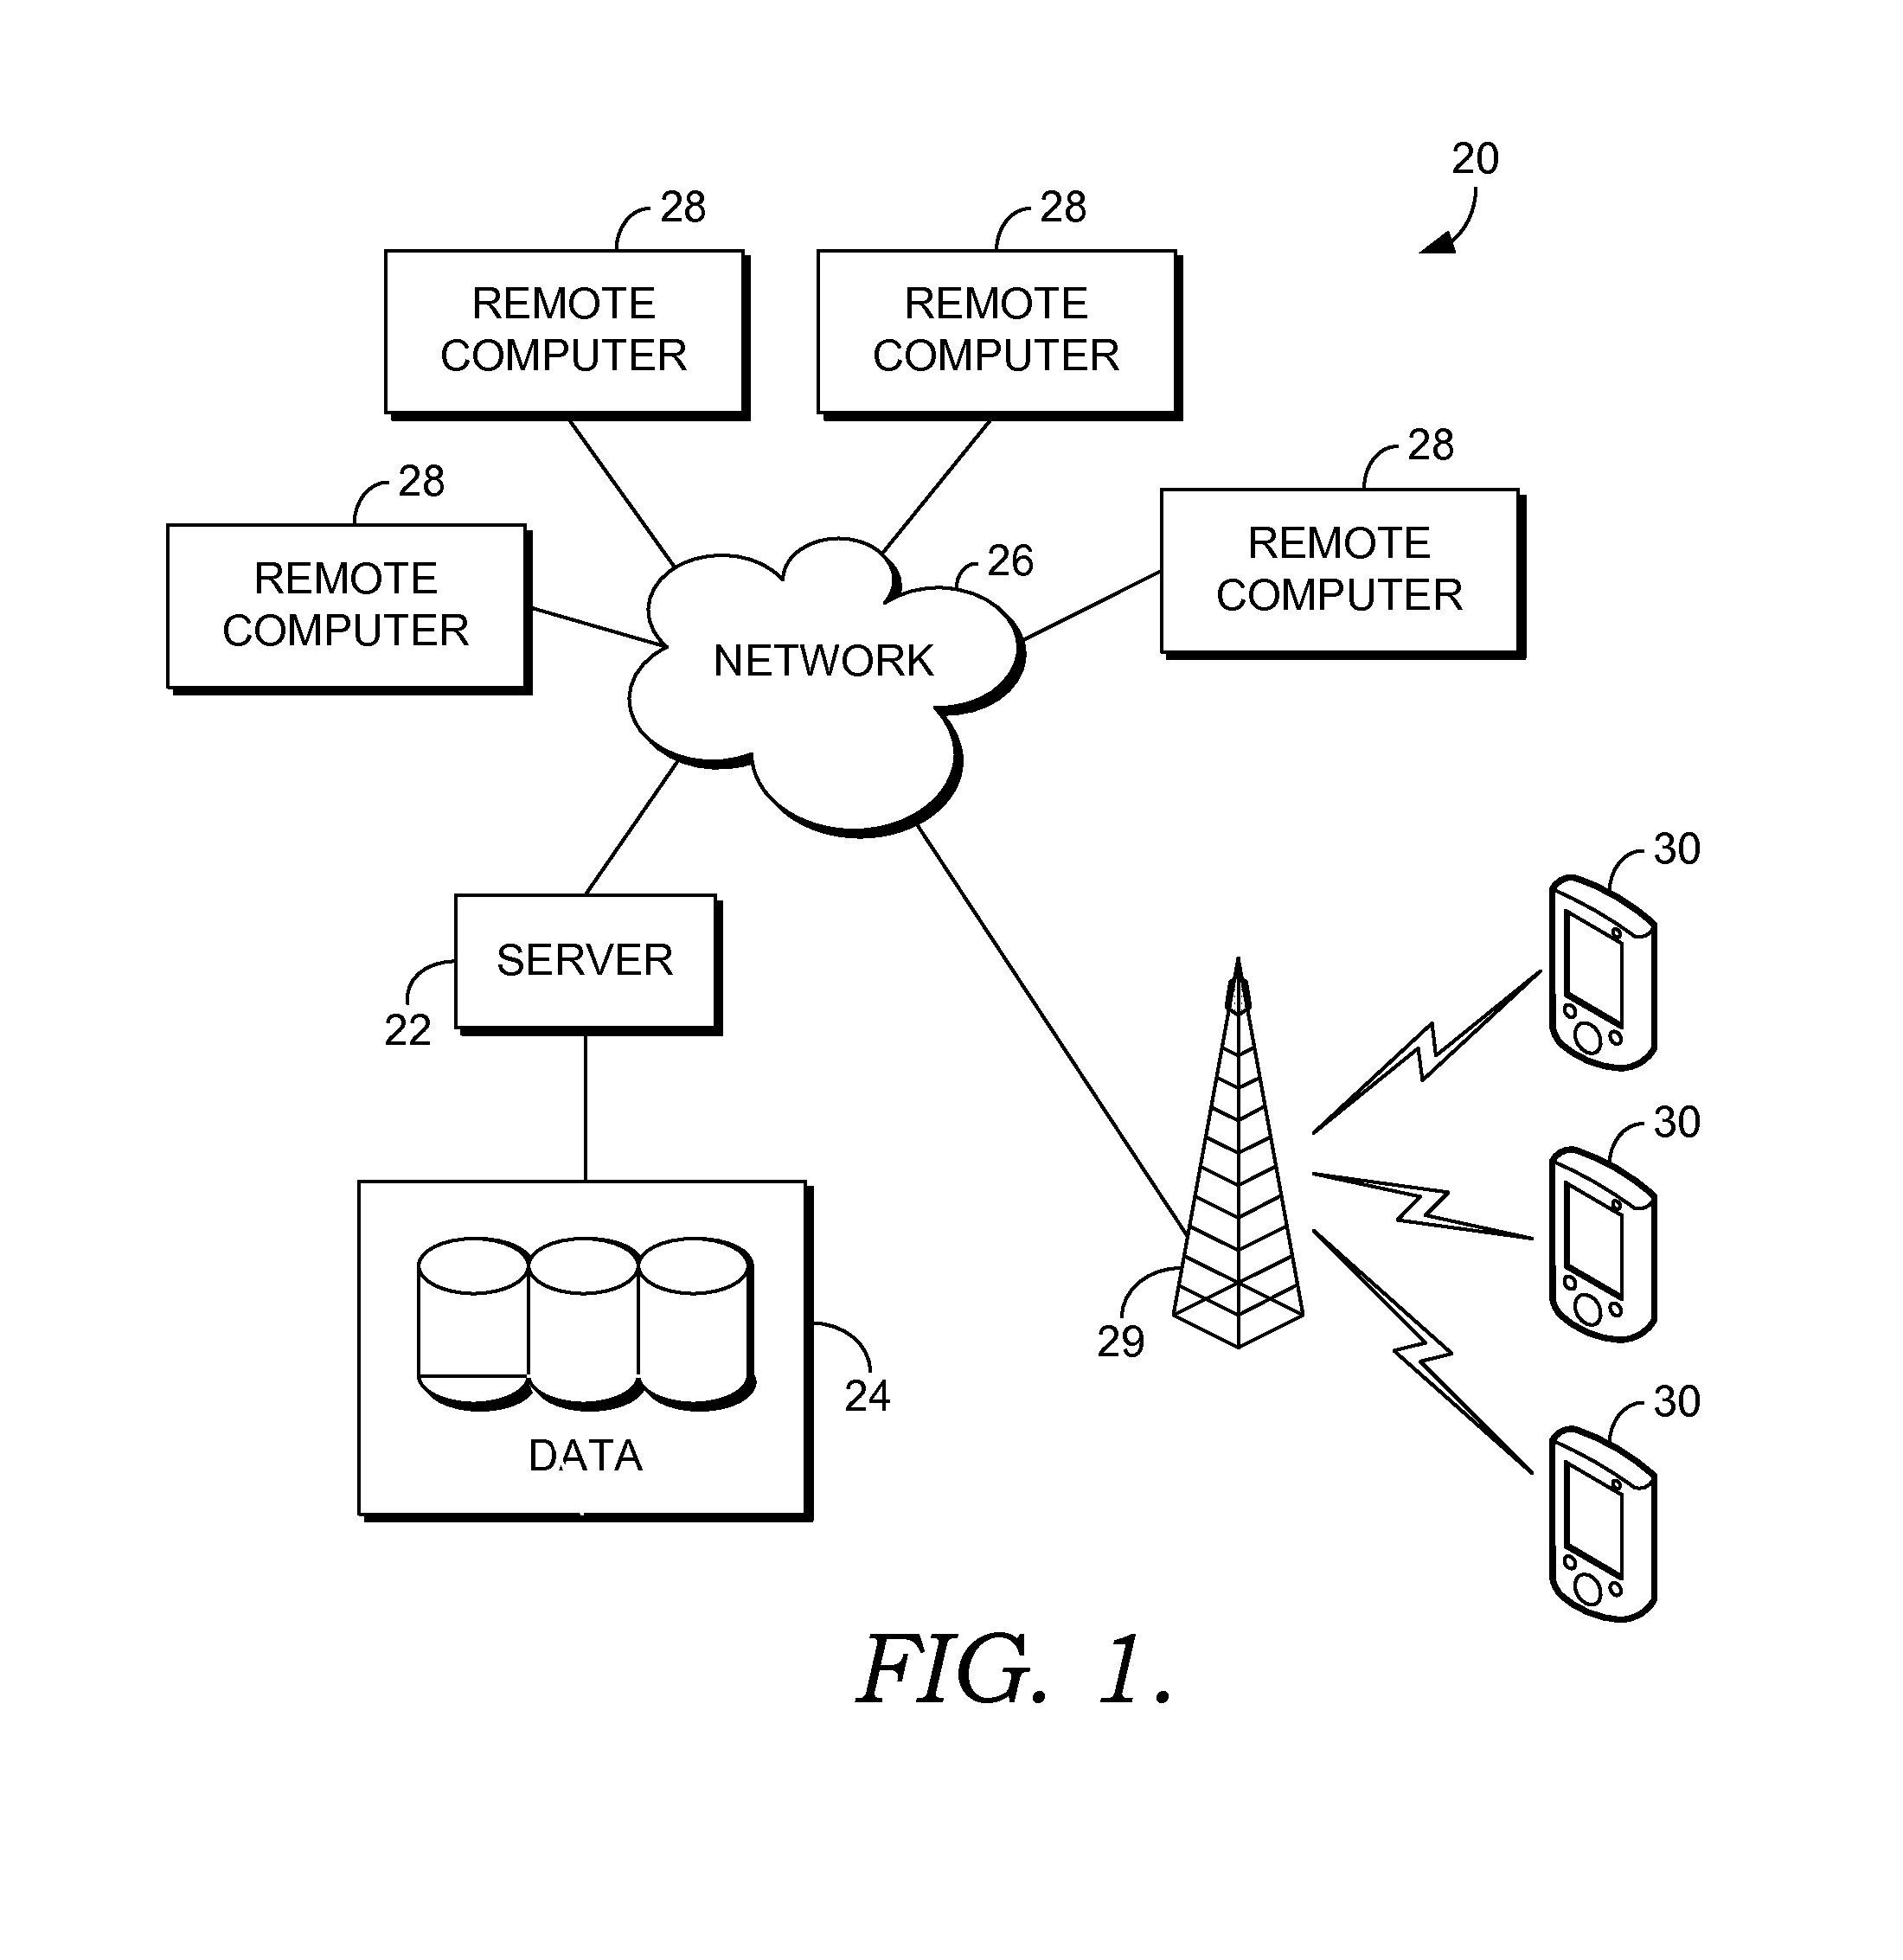 System and method for generating and sending promotional offers via text message